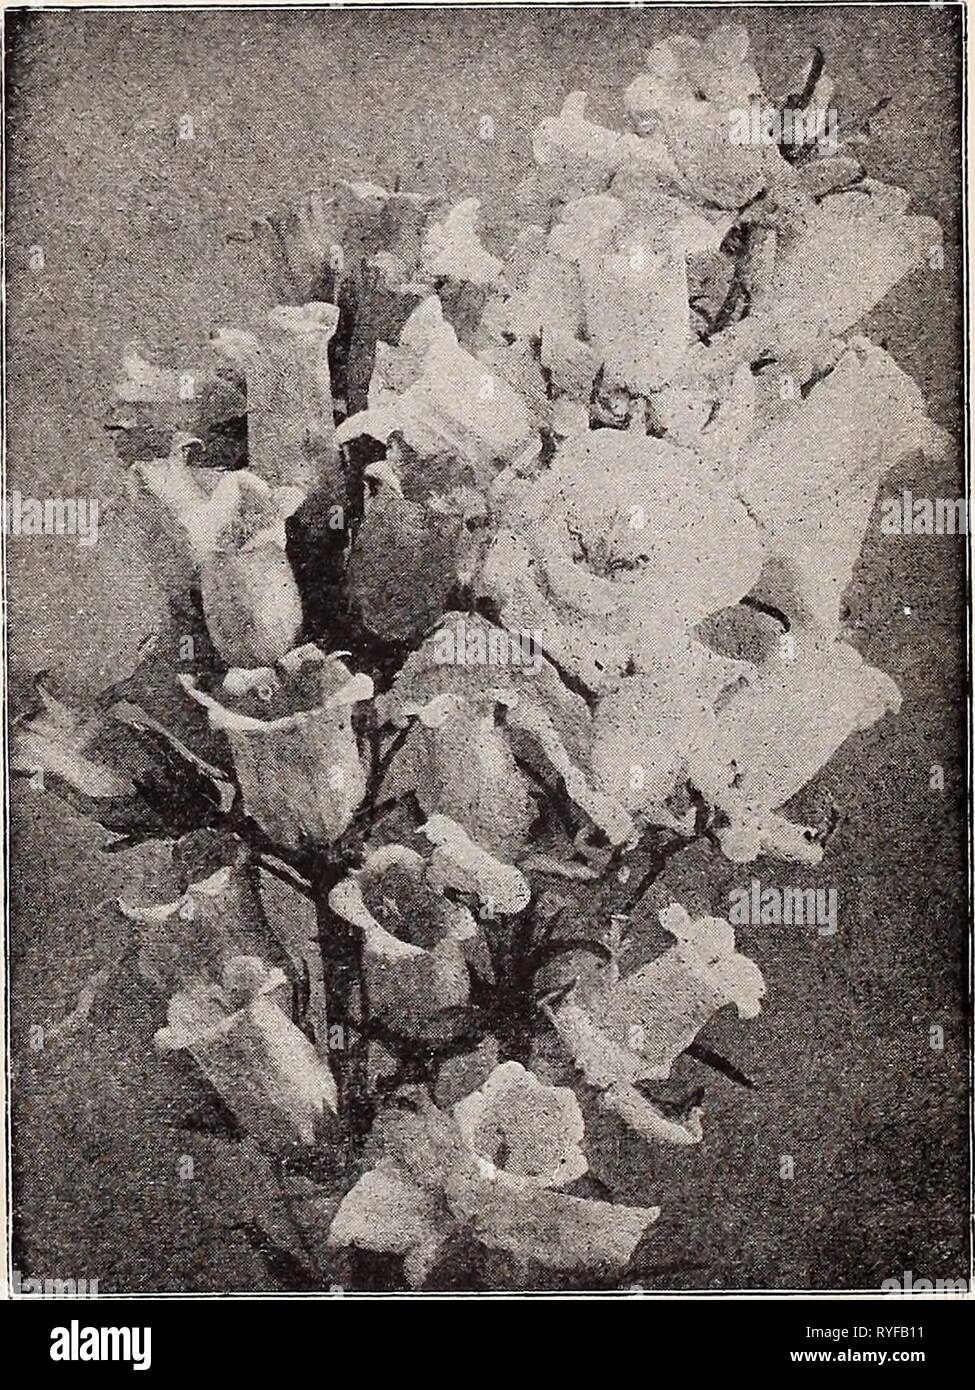 Dreer's wholesale price list for florists : special spring edition  dreerswholesalep1932henr 2 Year: 1932  Cimicifuga Simplex Campanula (Bell Flower) Per doz. Per 100 Calycanthema (Cup and Saucer). White, pink, blue or mixed colore. 4-inch pots $l 50 $10 00 Carpatica, Blue. 3-inch pots 1 75 12 00 ' White. 3-inch pots 1 75 12 00 GnrKanlon. 3-inch pots 2 50 18 00 Glome rata. 3-inch pots 1 75 12 00 Grandlg. 3-inch pots 1 75 12 00 ' Alba.. 3-inch pots 1 75 12 00 Lactiflora. 3-inch pots 1 7B 12 00 Latifolla Mncranthn. 3-inch pots 1 75 12 00 Muralis. 3-inch pots 2 50 18 00 Medium. (Canterbury Bells) Stock Photo